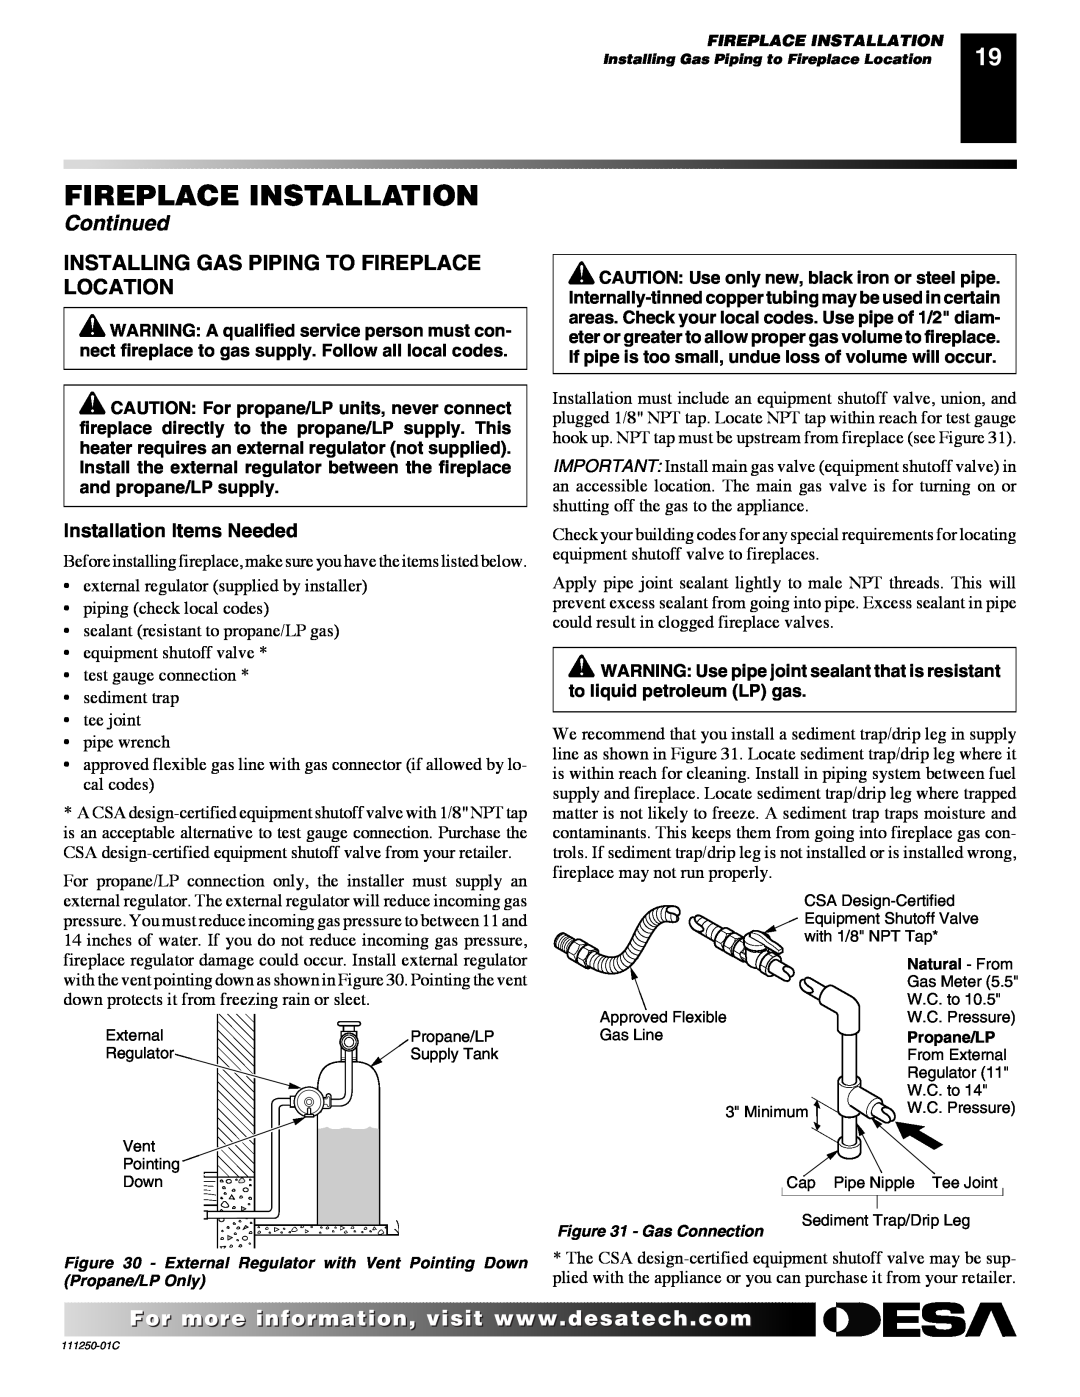 Desa (V)T36NA SERIES installation manual Installing Gas Piping To Fireplace Location, Fireplace Installation, Continued 